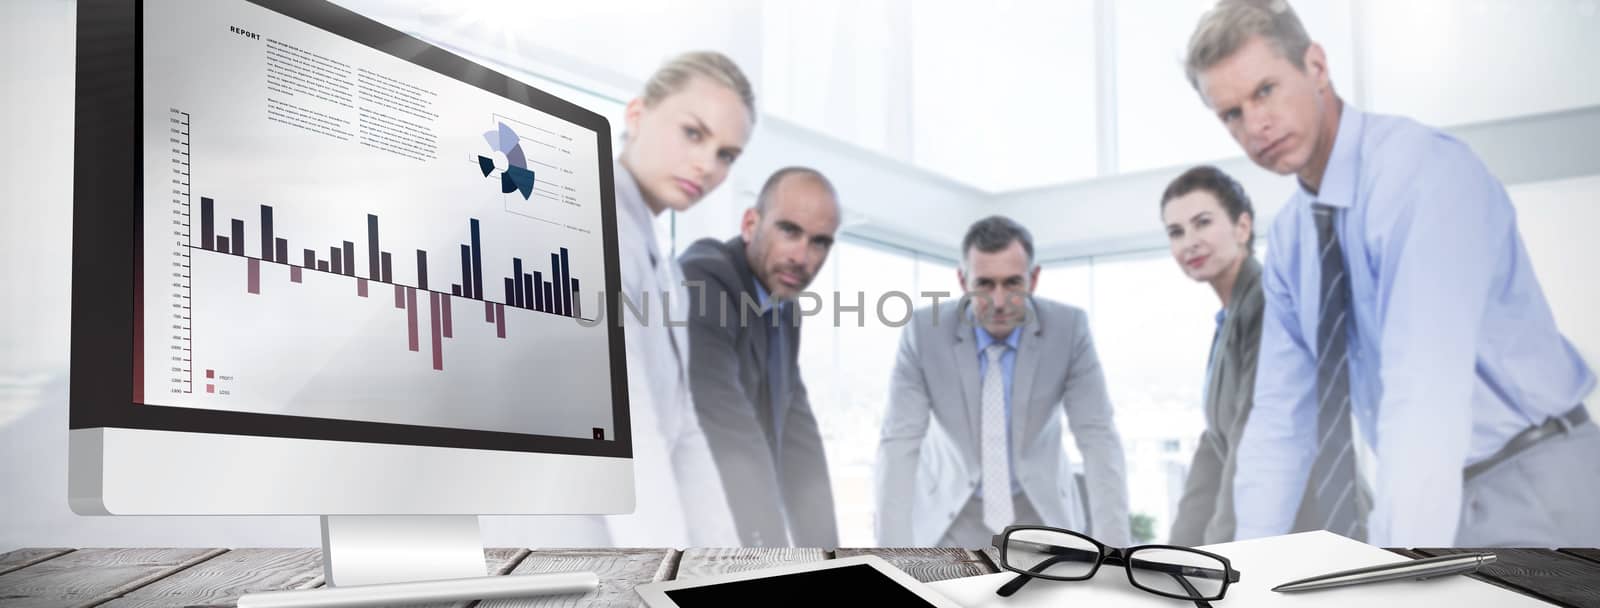 Business interface with graphs and data against business colleagues discussing about work